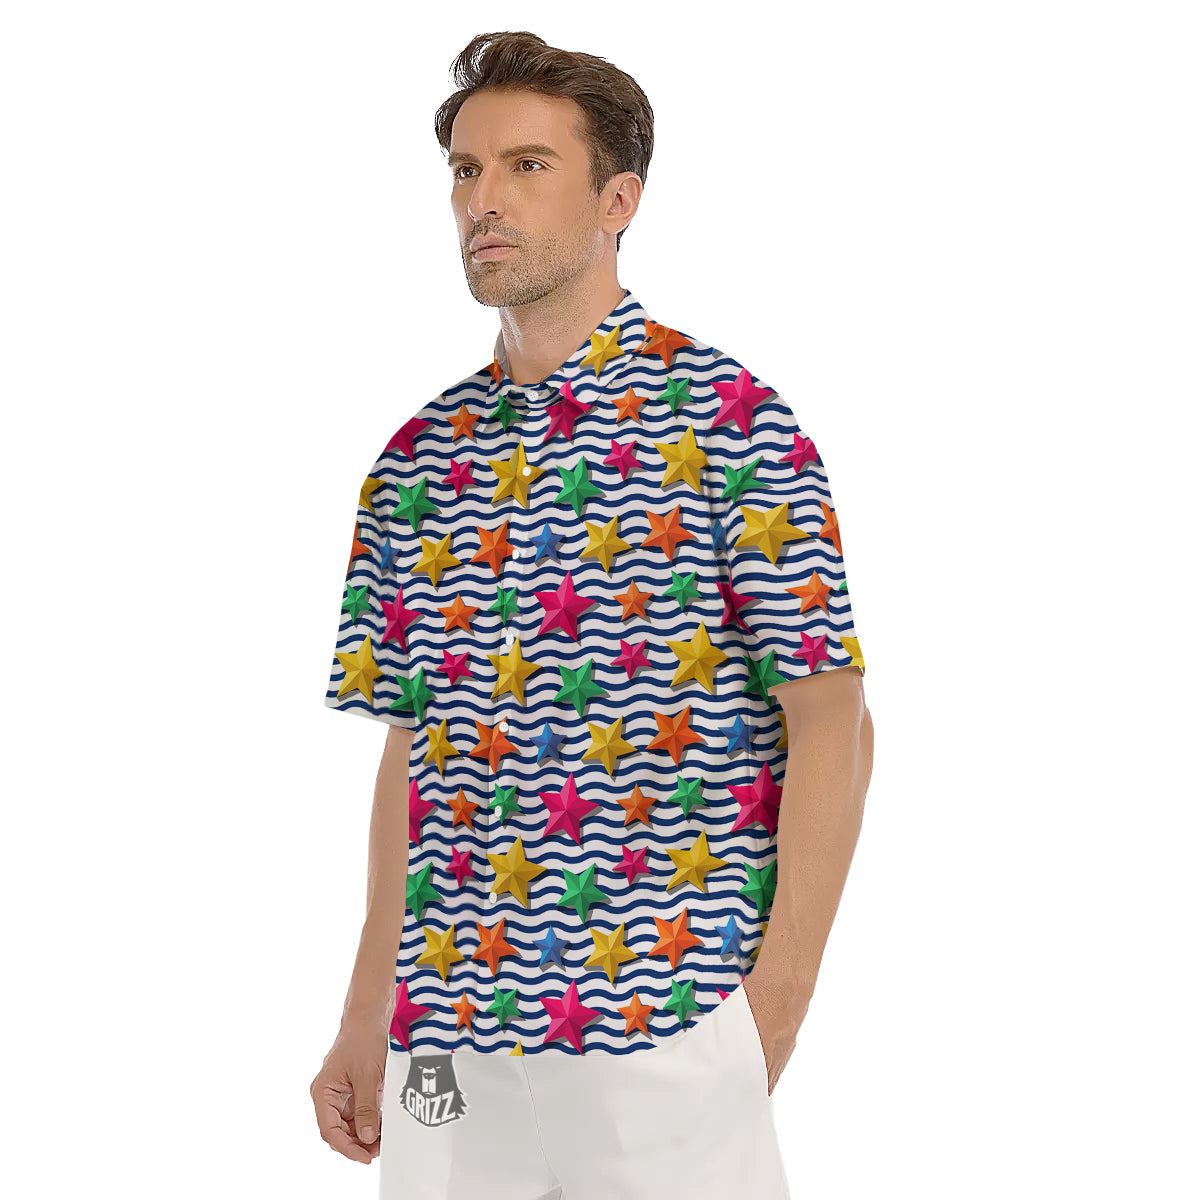 3D Stars And Blue Wave Print Pattern Men's Short Sleeve Shirts-grizzshop